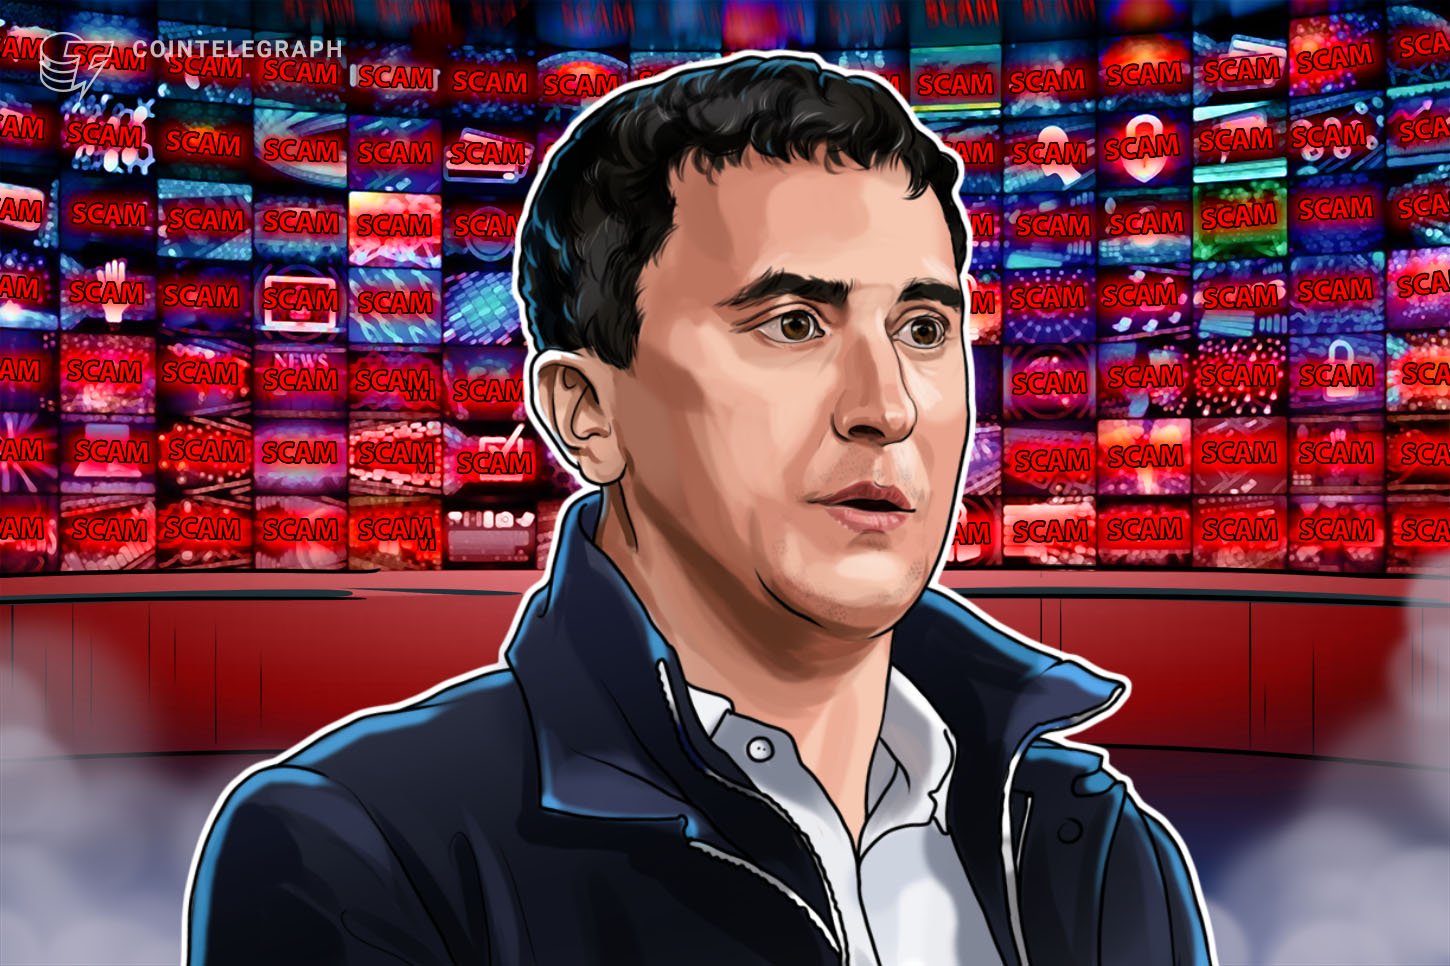 BTC Maximalists Are Proper That 95% of Crypto Is a Rip-off, Says Emin Gun Sirer